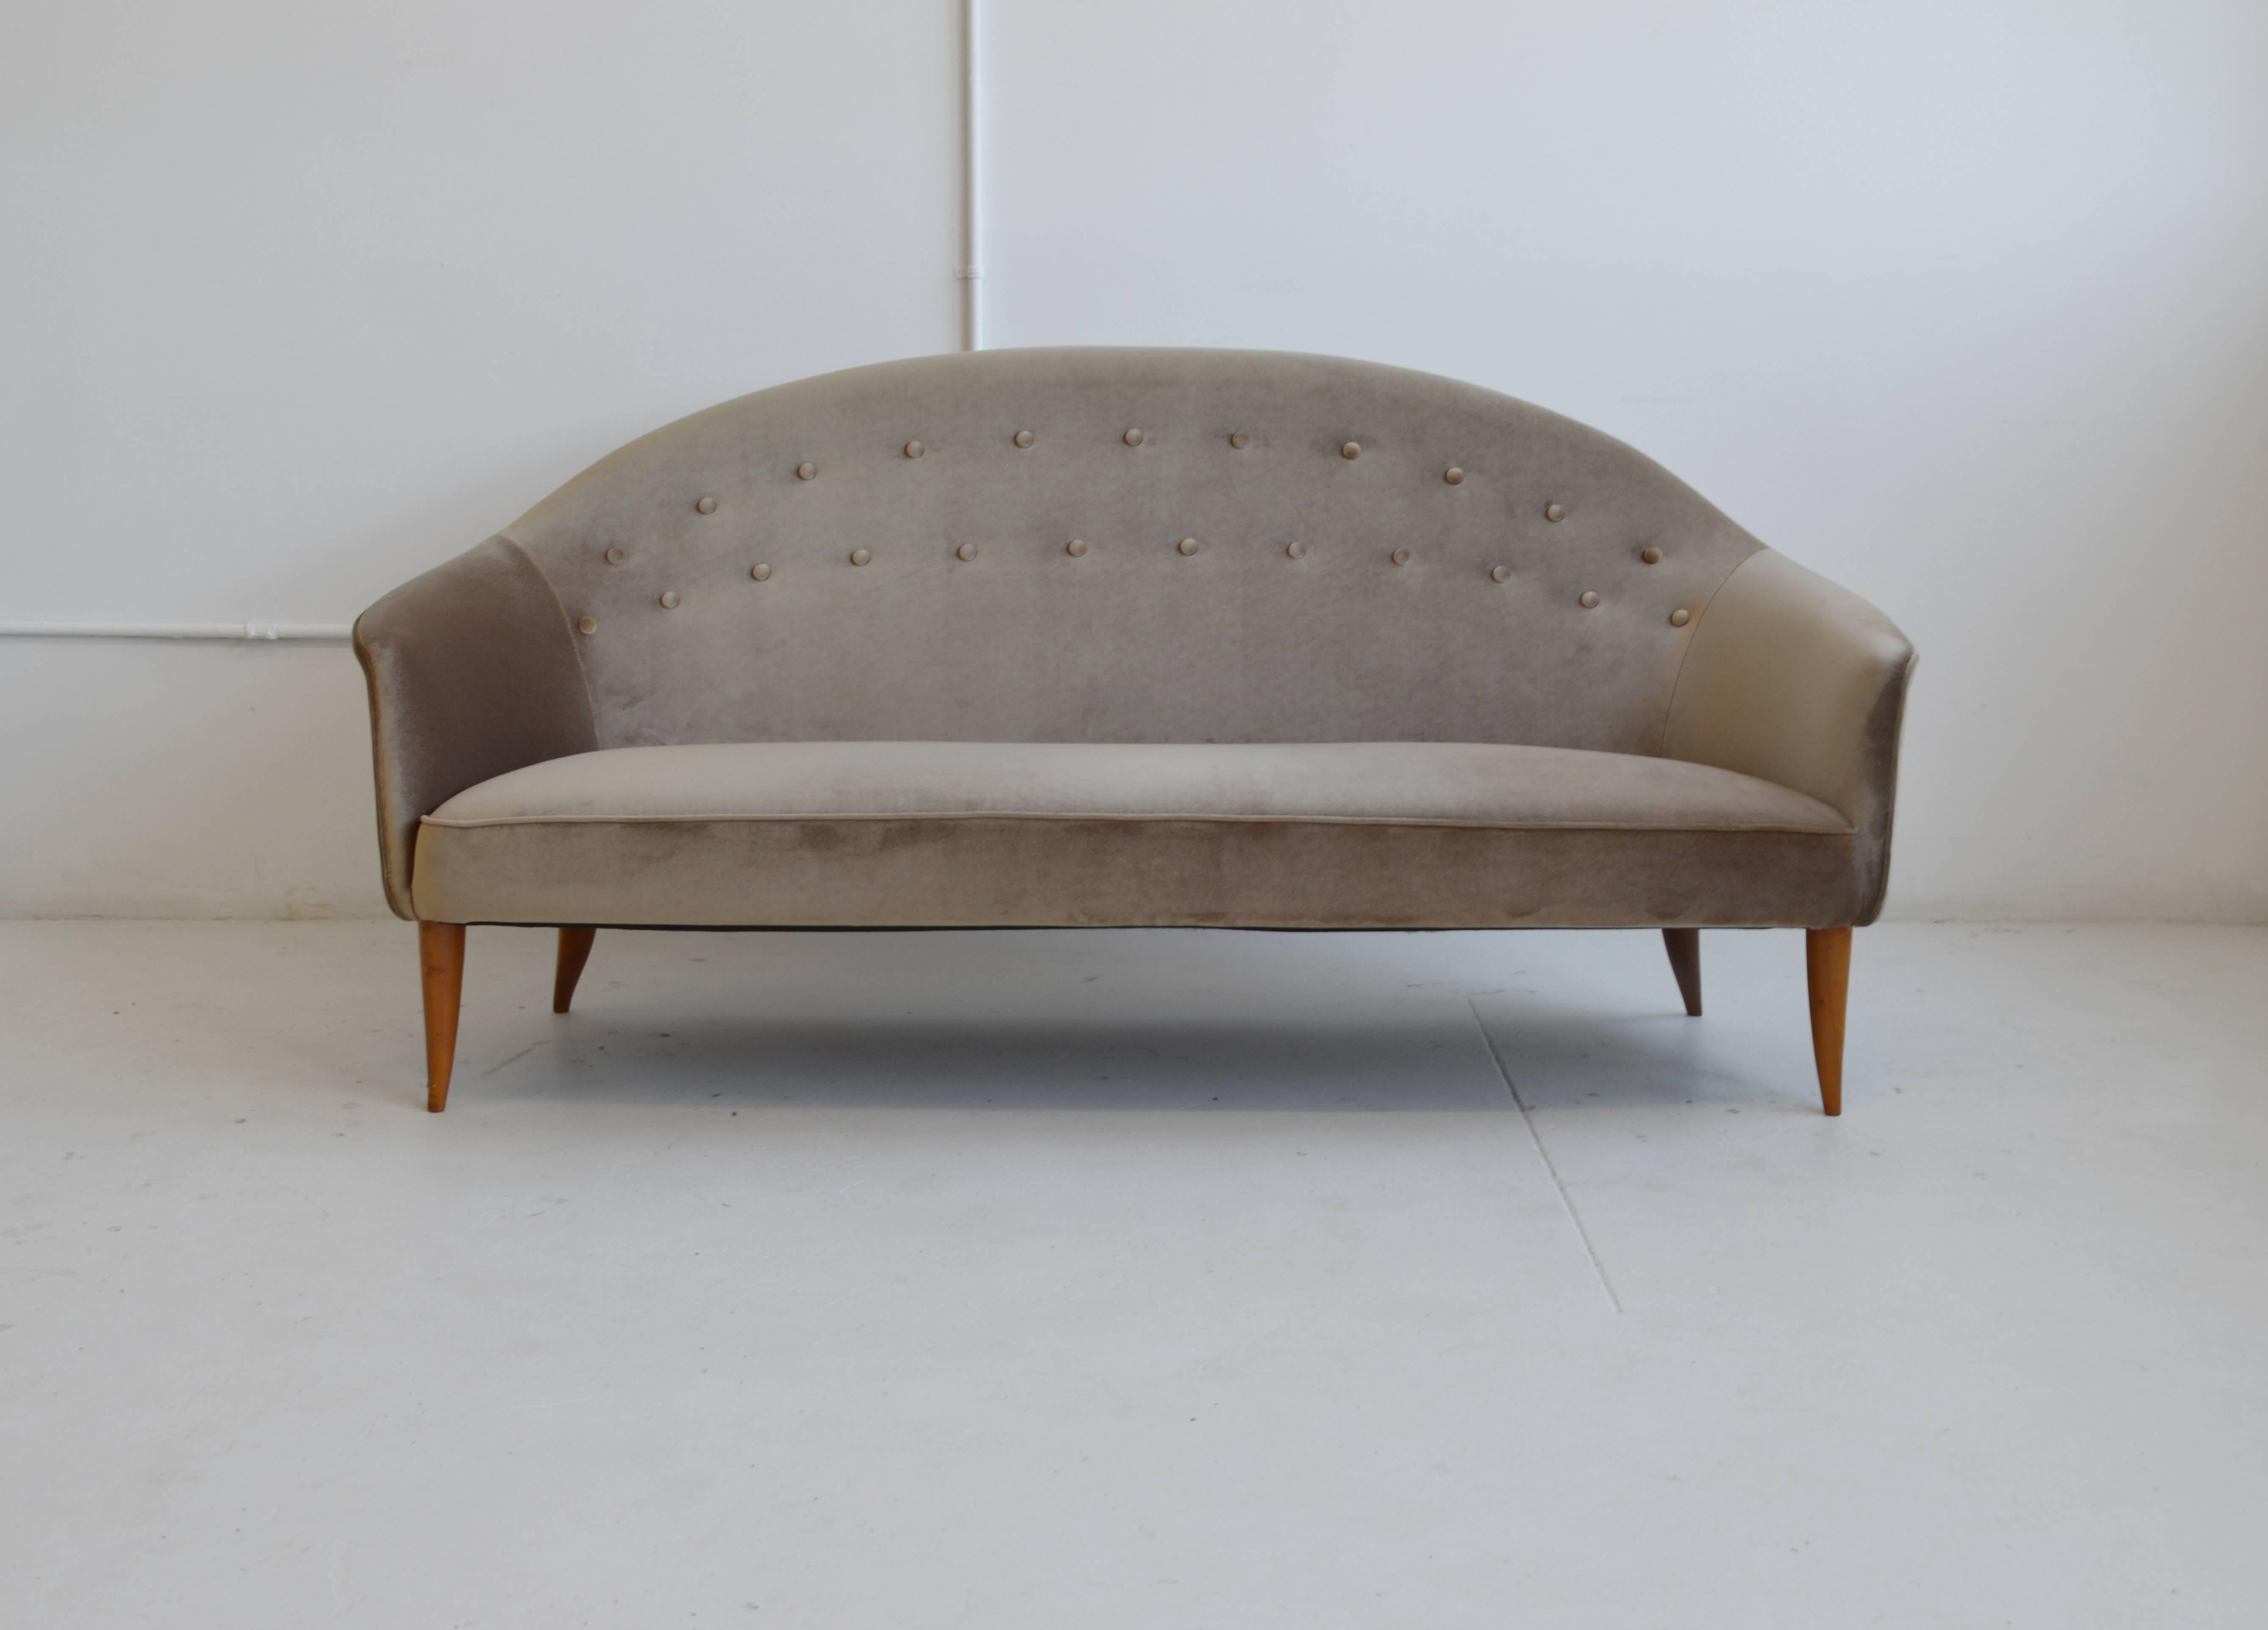 Paradise Sofa by Scandinavian designer Kerstin Hörlin-Holmquist for Nordiska Kompaniets Verkstader. This sophisticated sofa features near flawless velvet upholstery, beech solid wood legs and acts as a wonderful settee. This sofa would make an